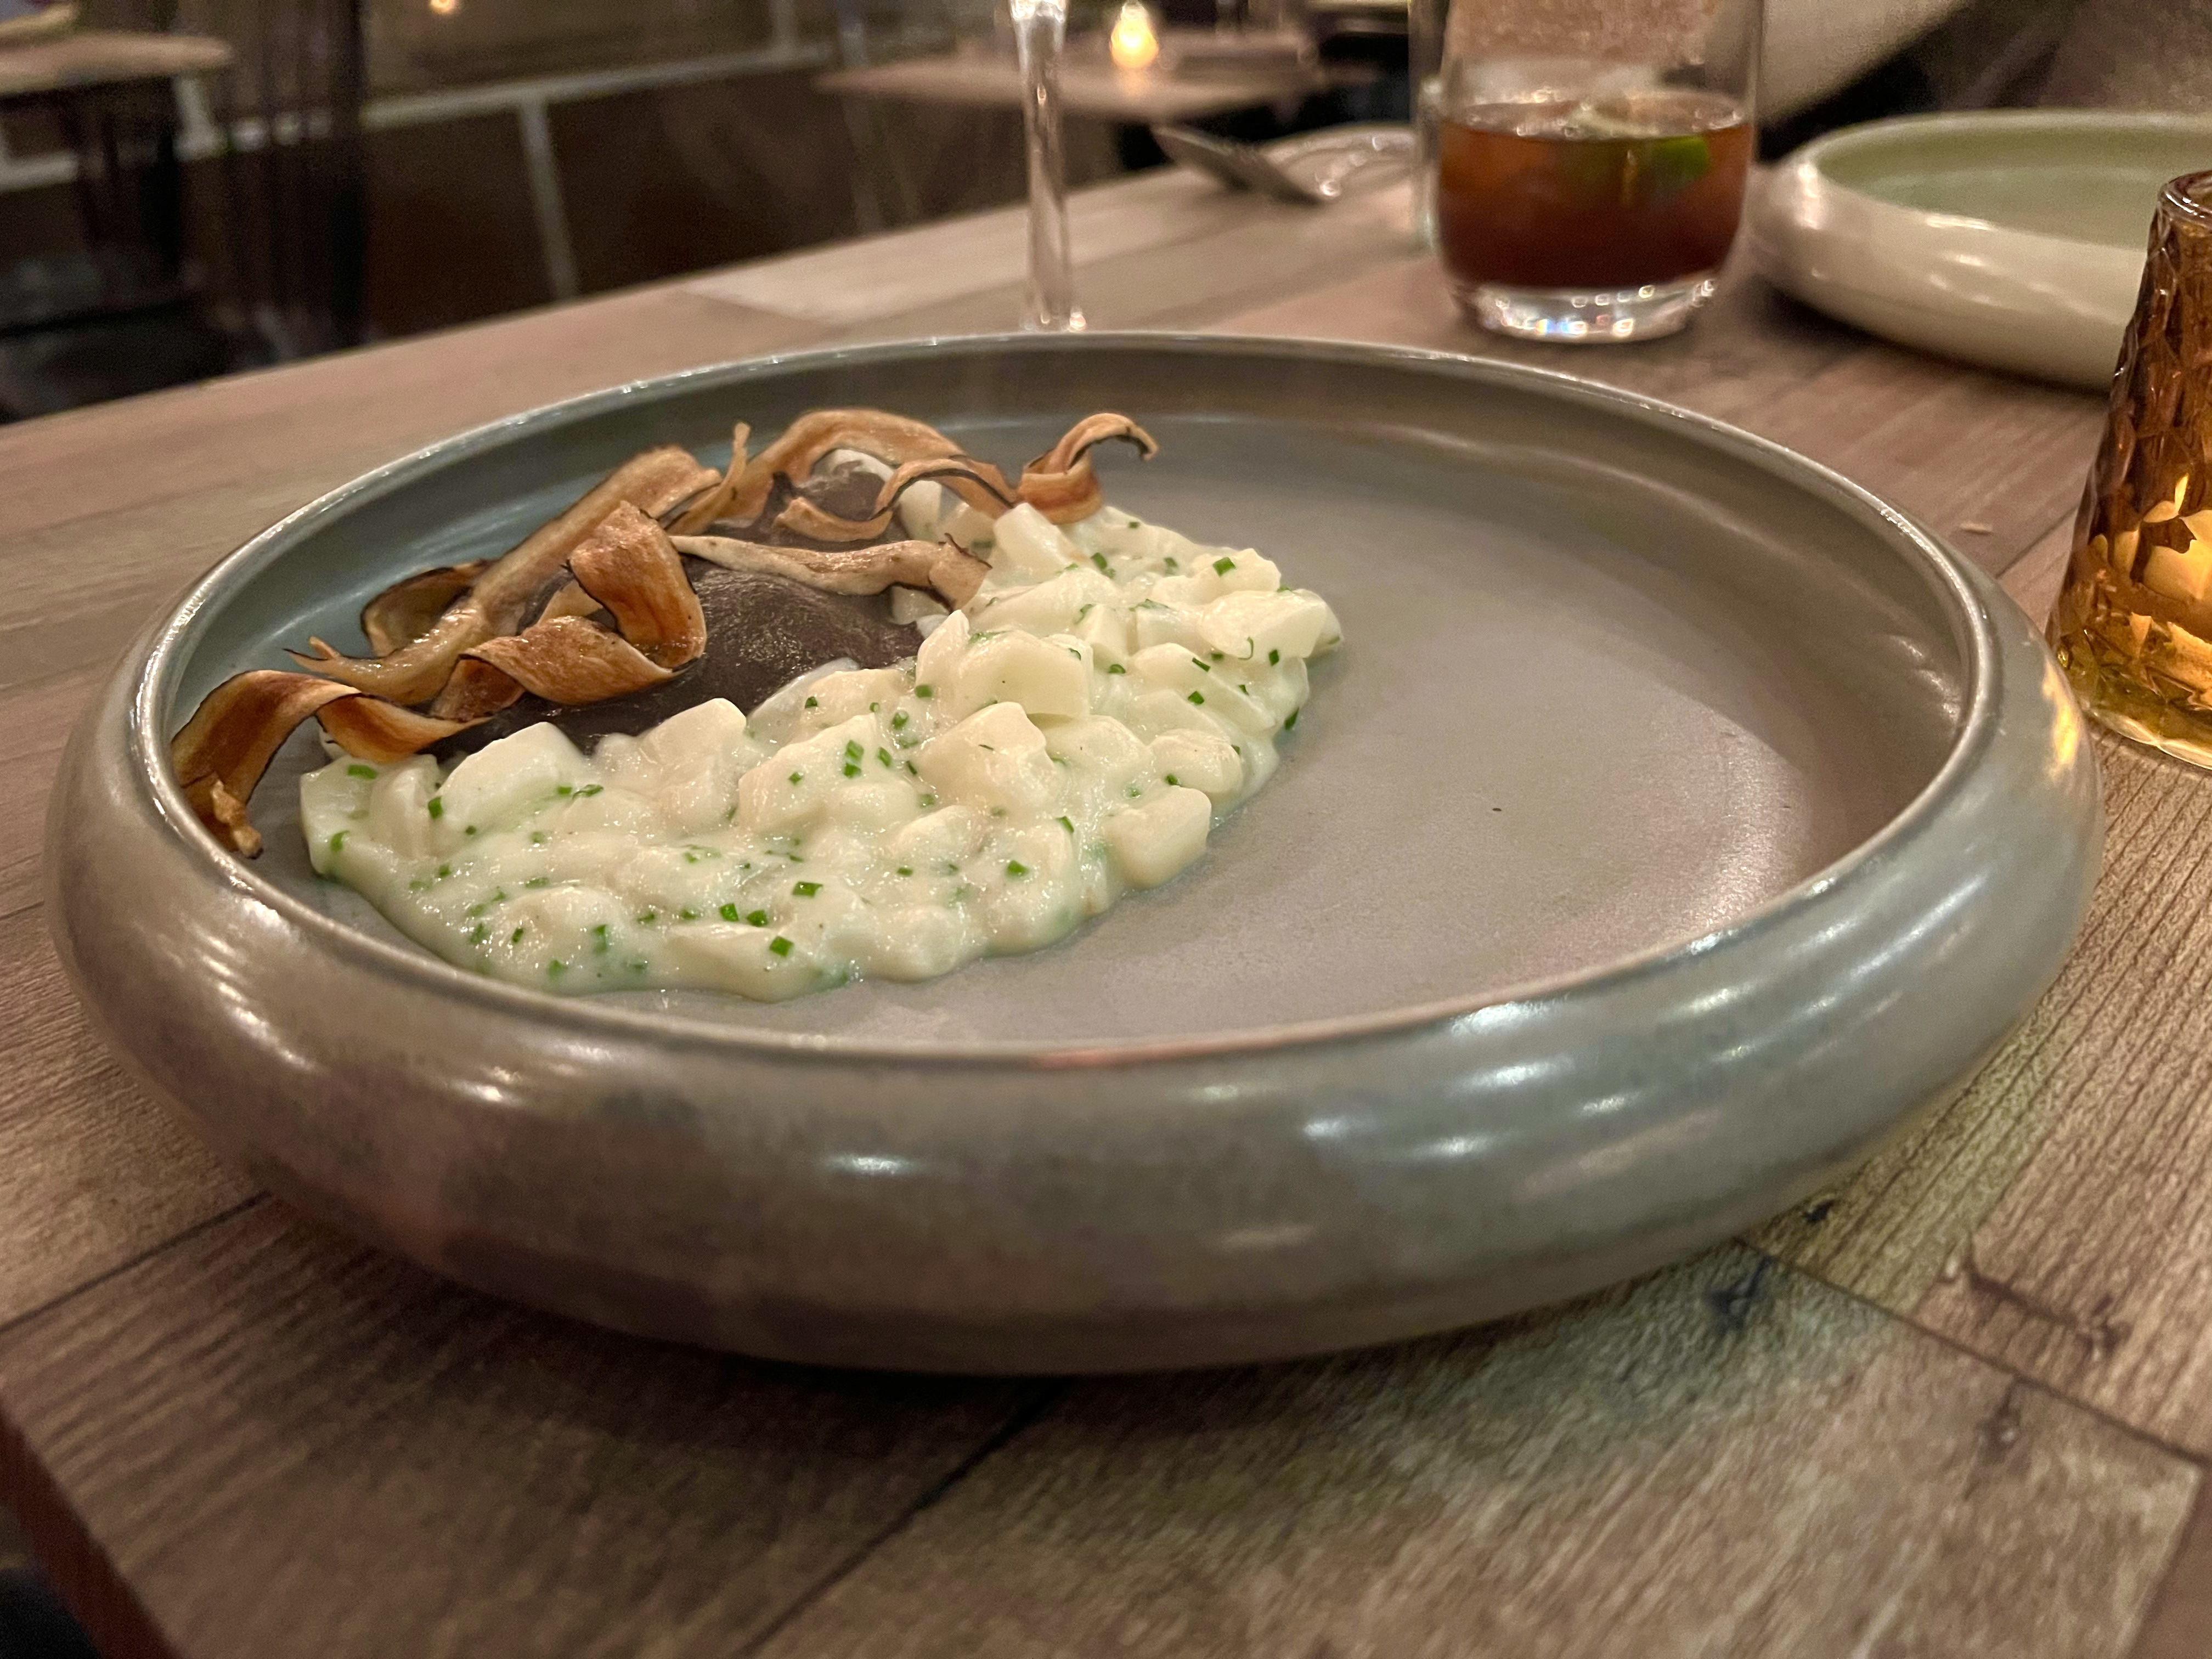 A pile of salsify risotto sits at the far edge of an empty grey bowl, next to grey trumpet mushroom puree